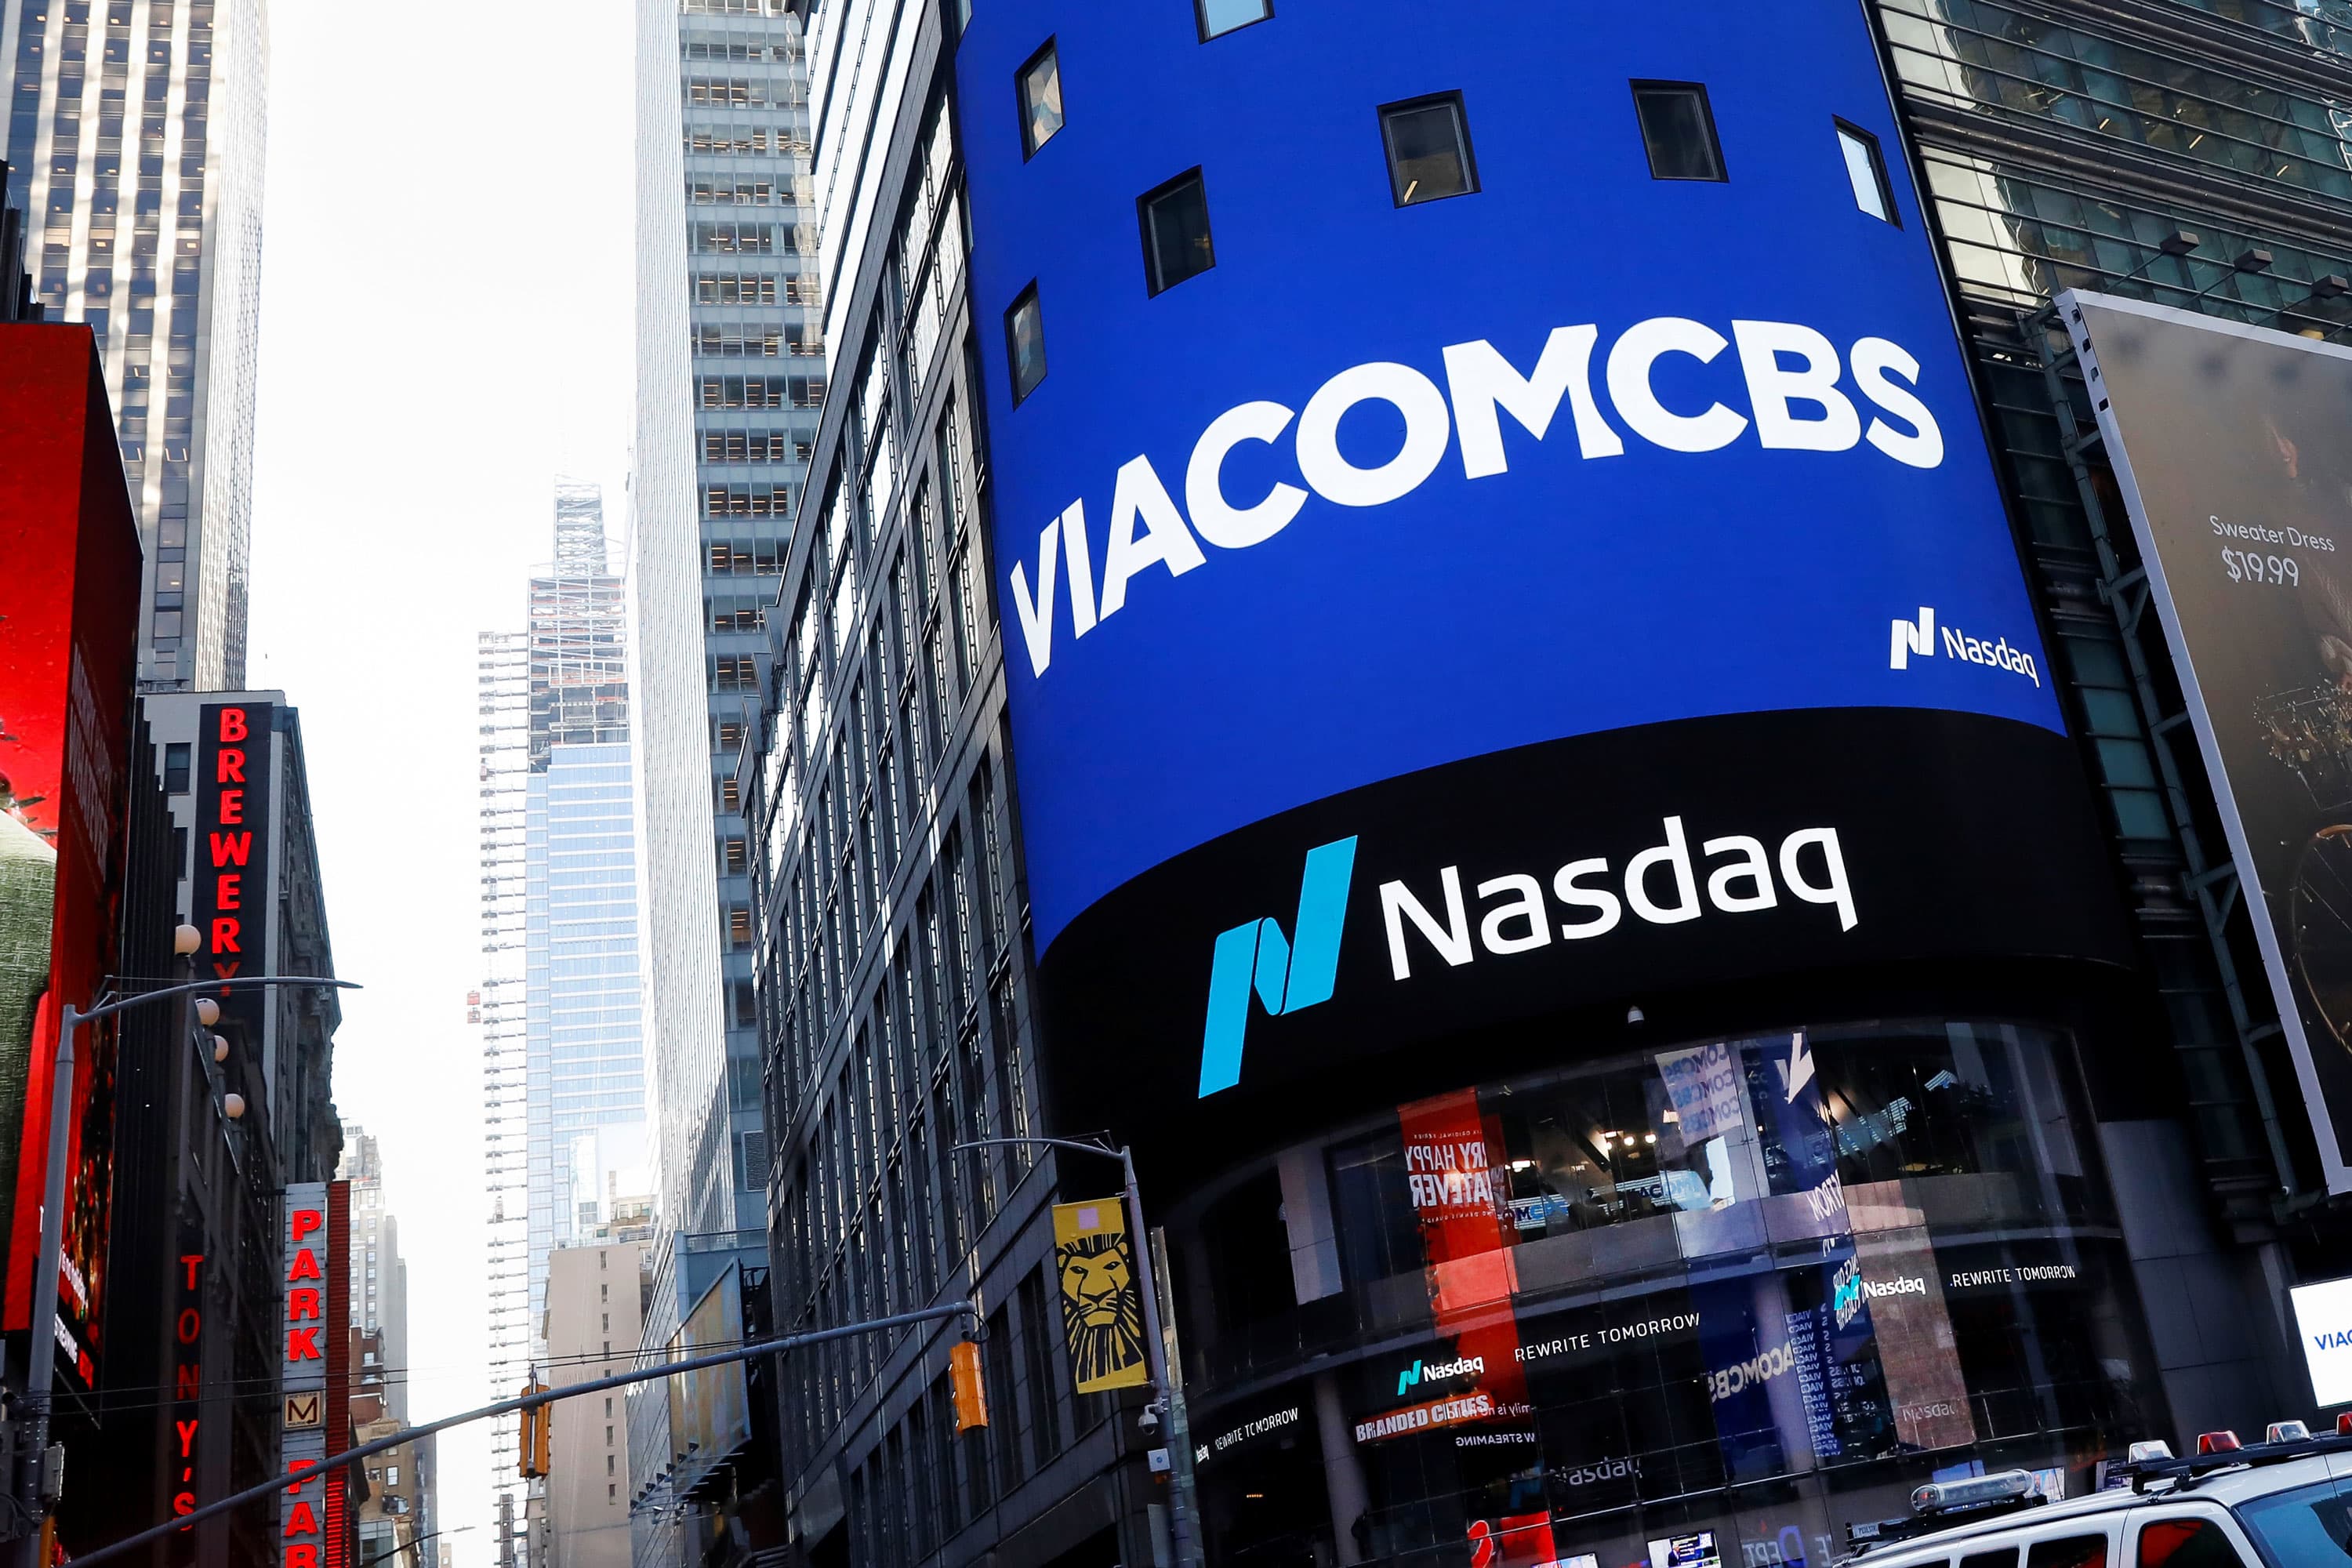 Archegos Capital’s forced liquidation contributes to the downfall of Viacom, Discovery